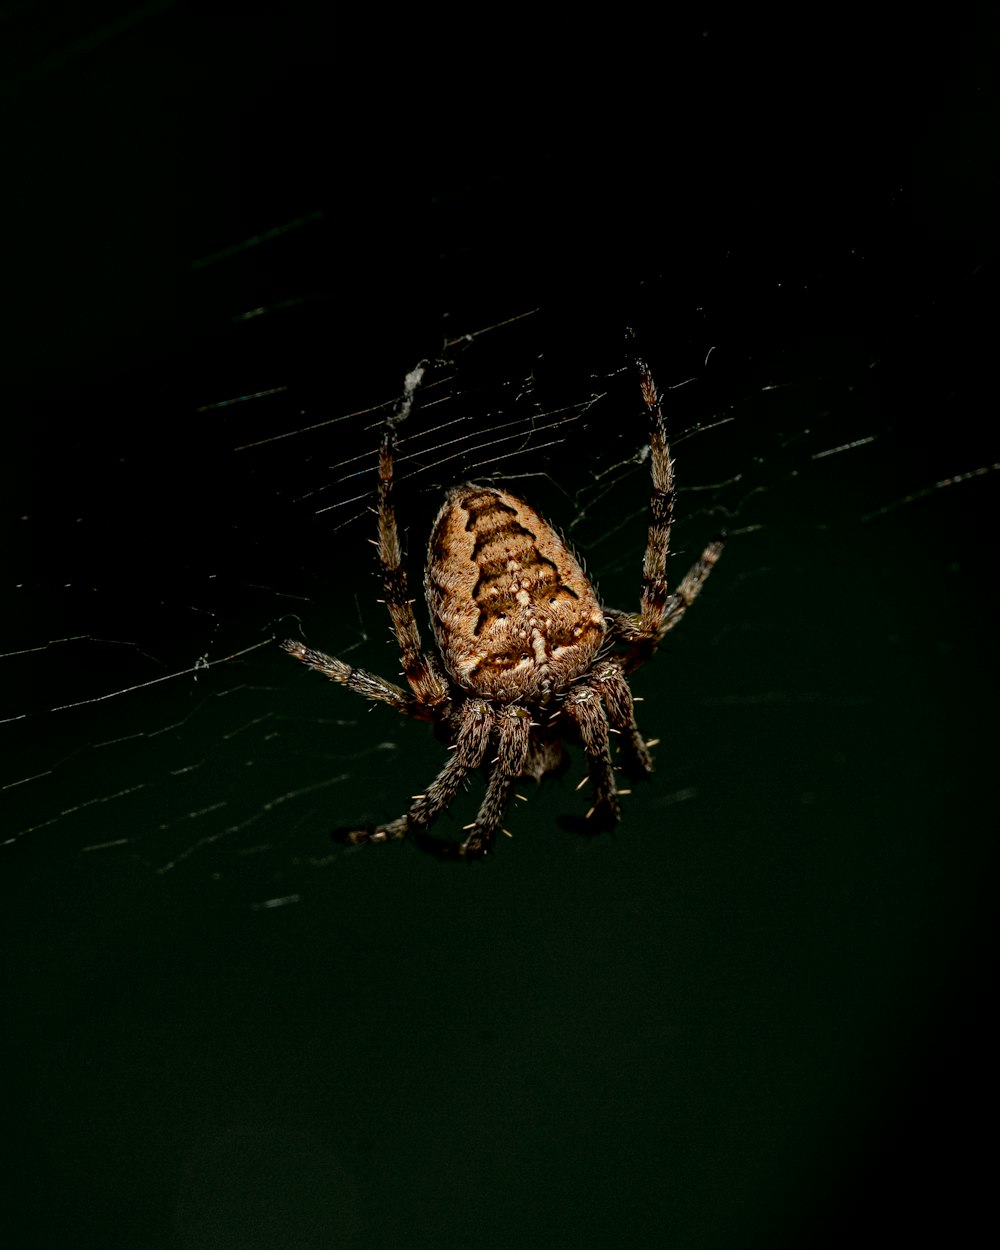 brown and black barn spider close-up photography